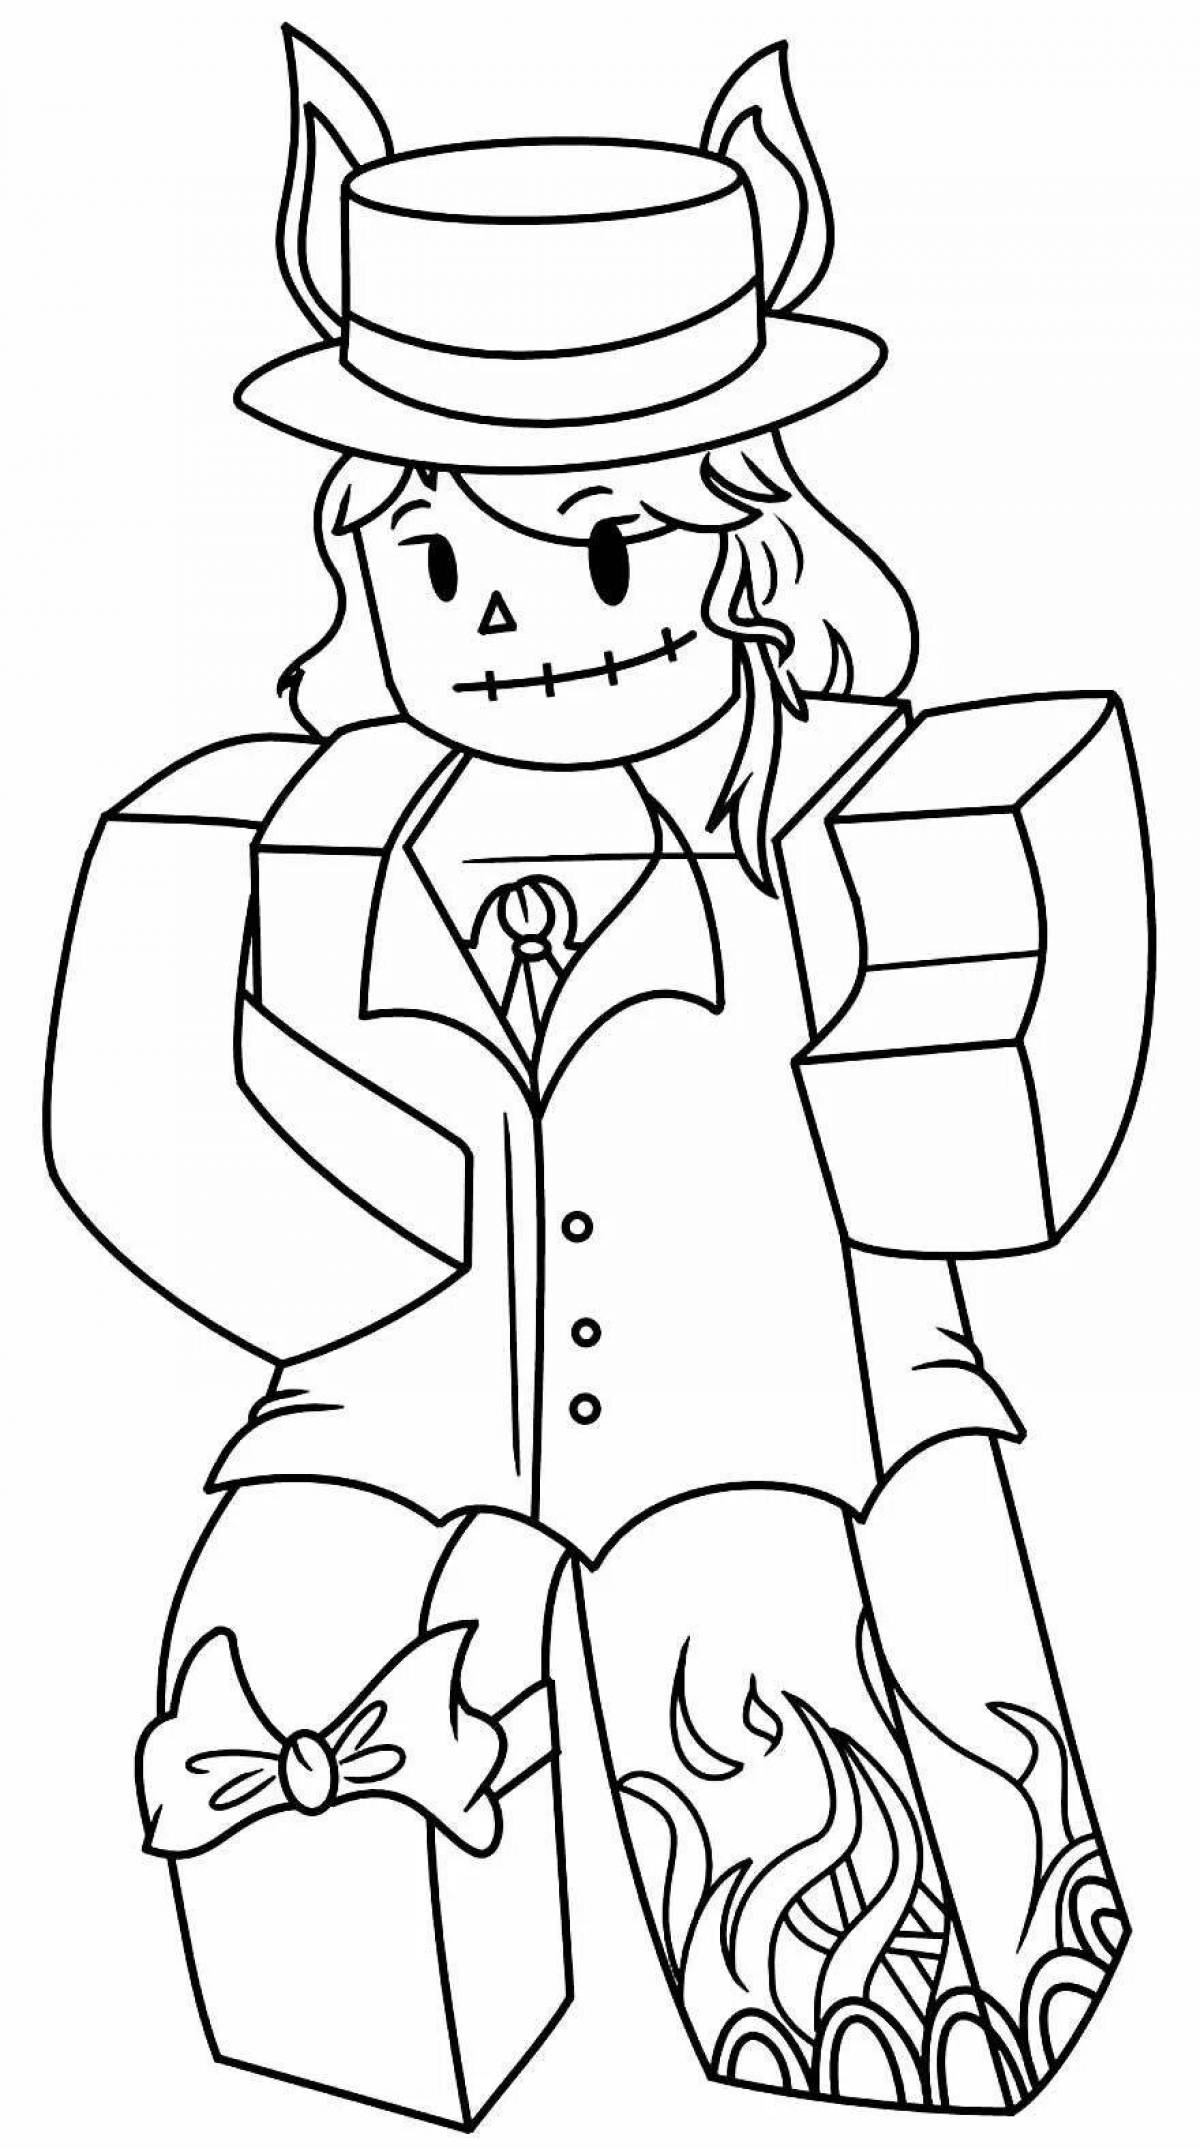 Roblox fabulous donator coloring page